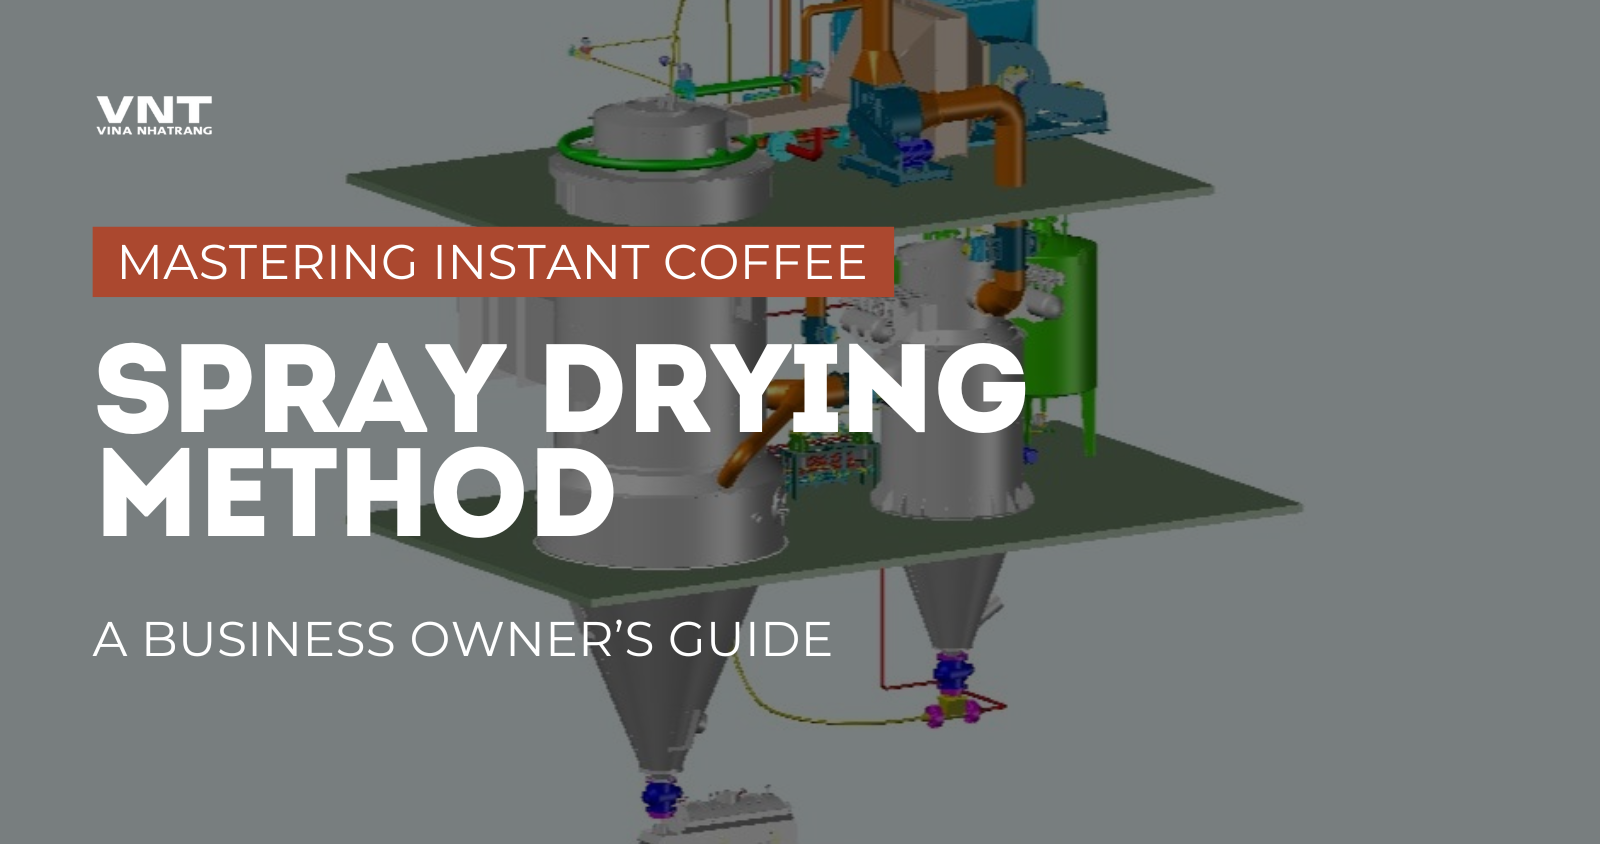 Mastering the Spray Drying Method for Instant Coffee: A Business Owner’s Guide